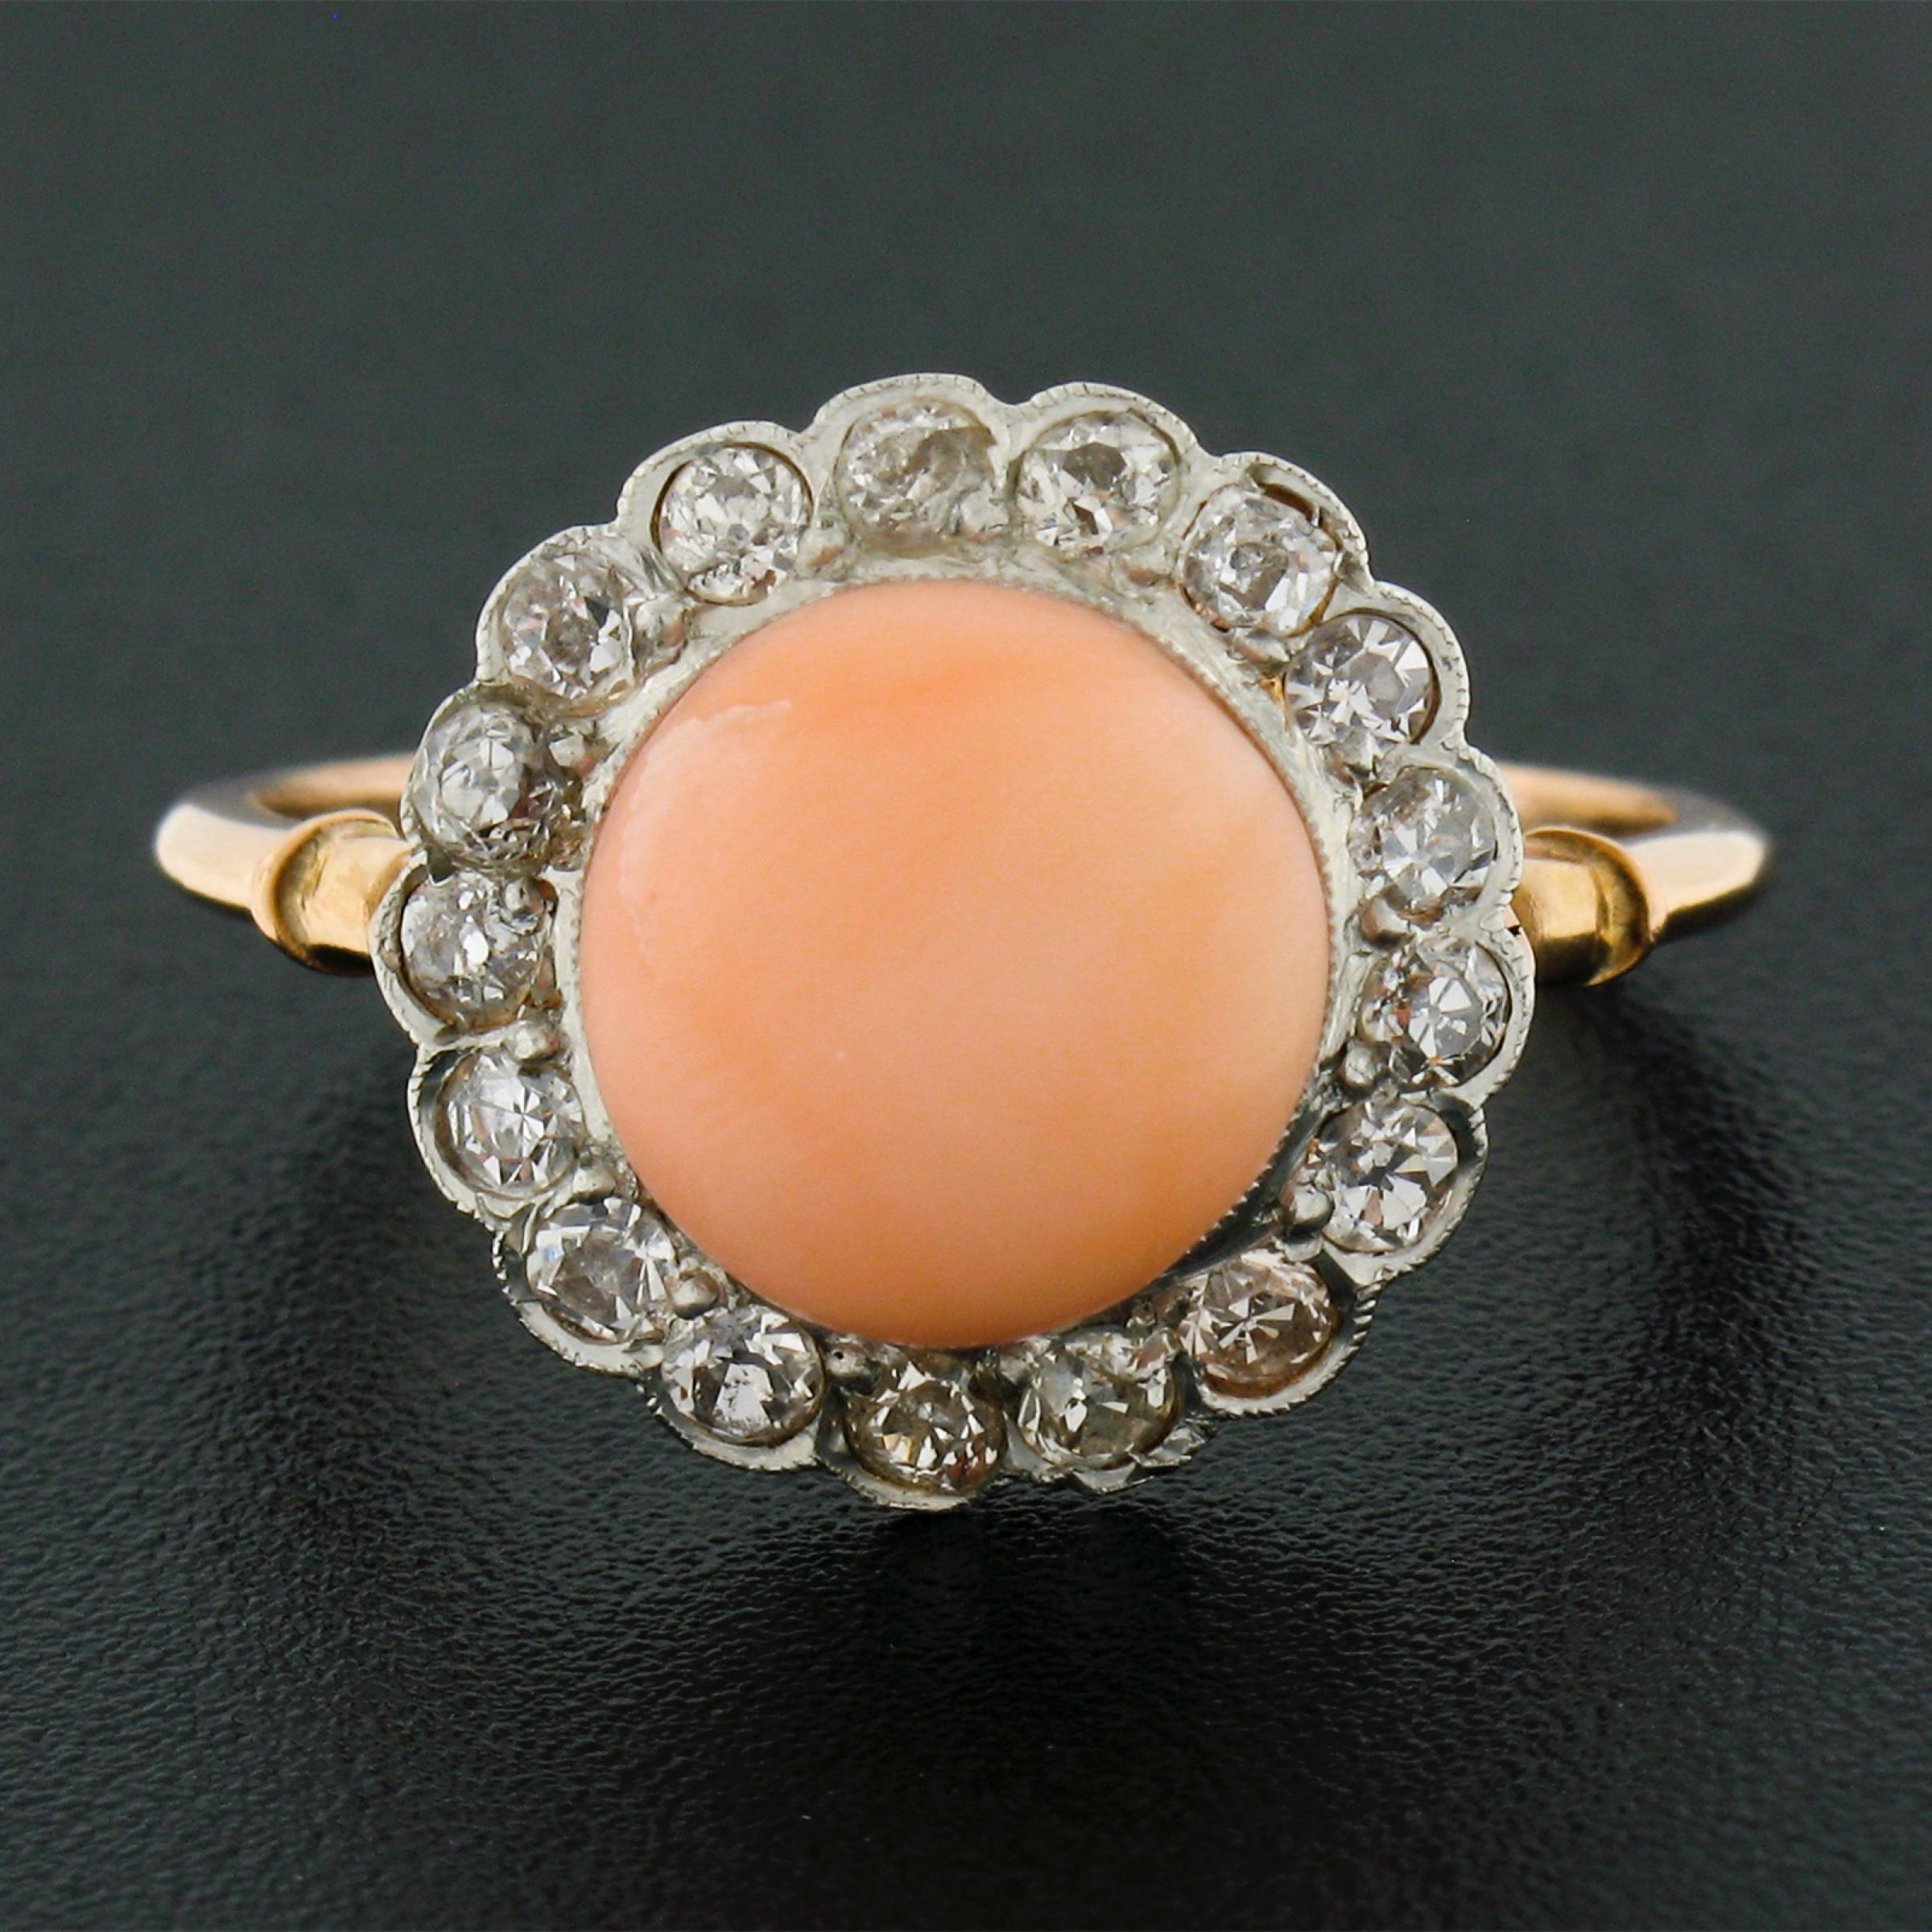 This absolutely gorgeous antique ring was crafted in solid 18k yellow gold and platinum during the Edwardian era. It features a 9.7mm button shape coral stone that is neatly set at the center of a fiery diamond halo. The coral has a very desirable